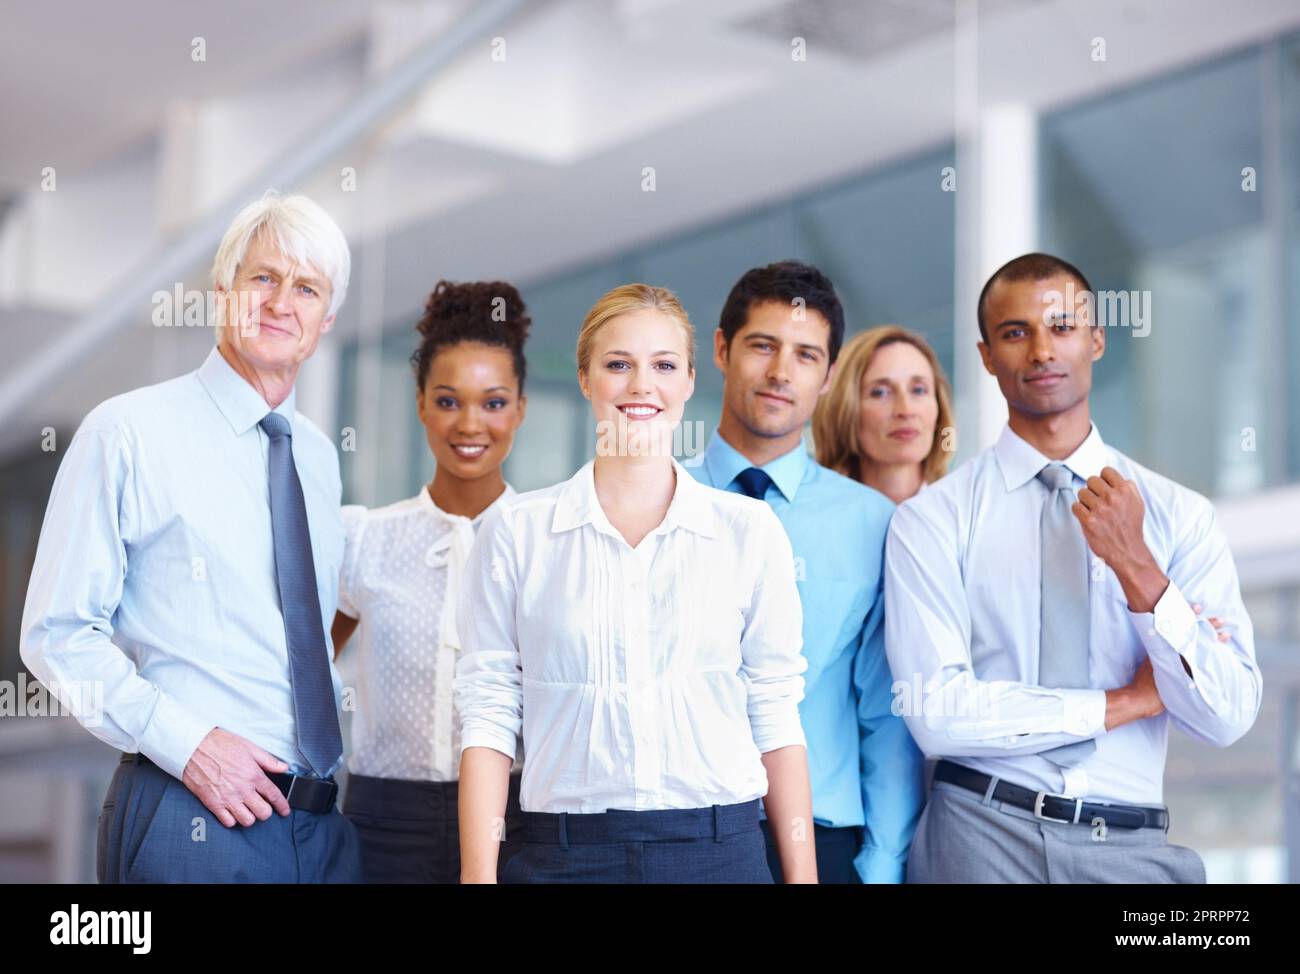 Confident business people. Portrait of confident multi racial business people together at office. Stock Photo